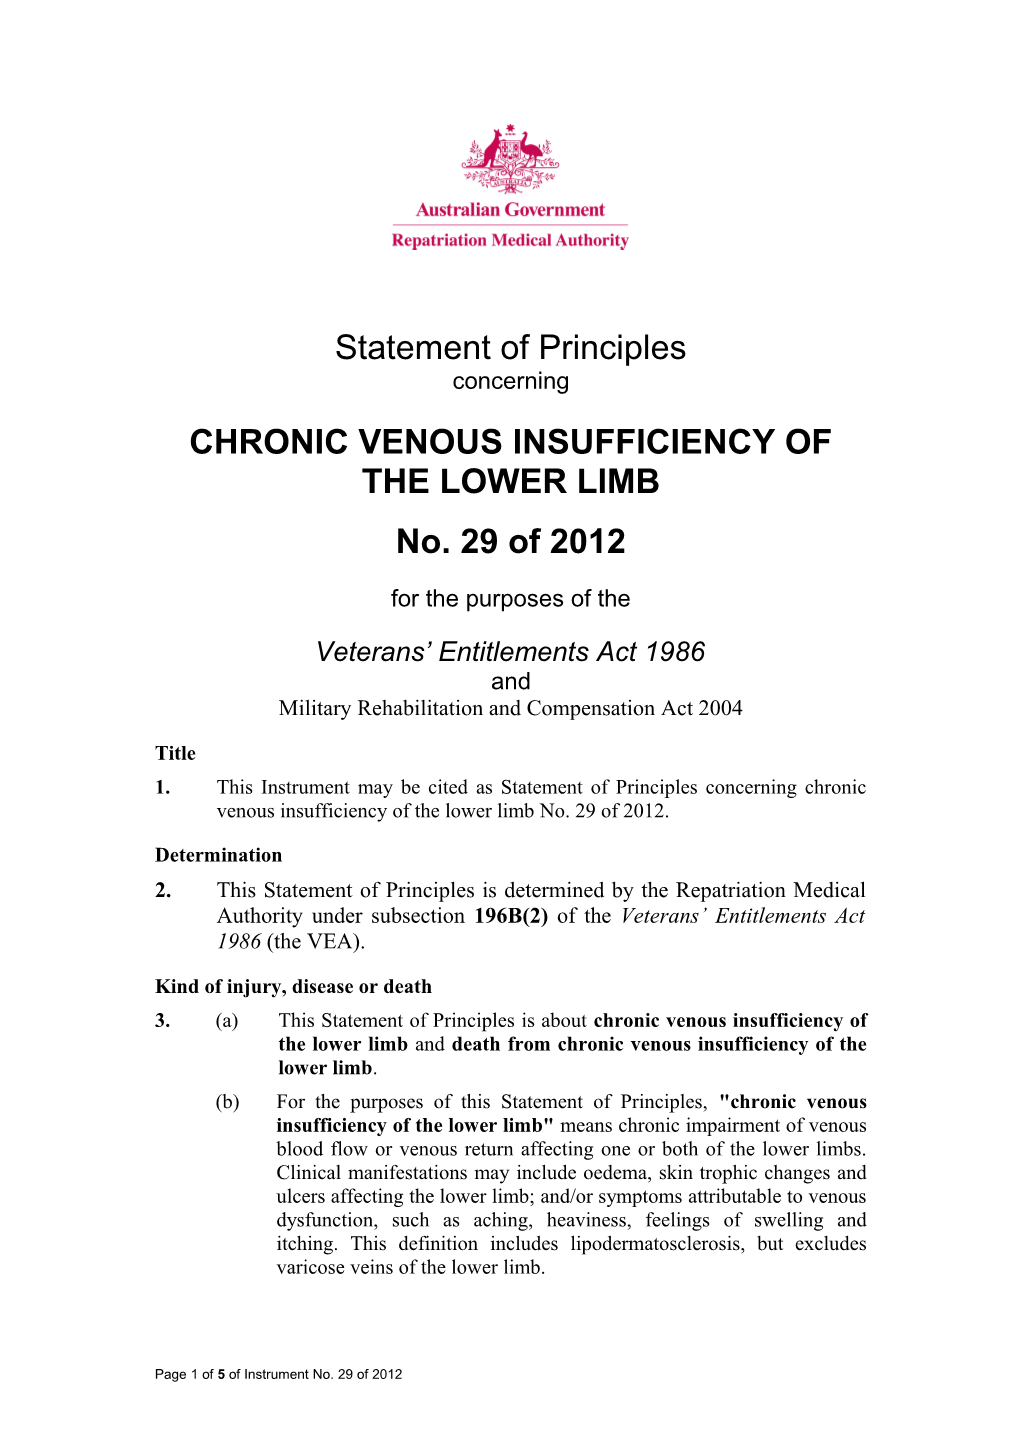 Statement of Principles 29 of 2012 Chronic Venous Insufficiency of the Lower Limb Reasonable